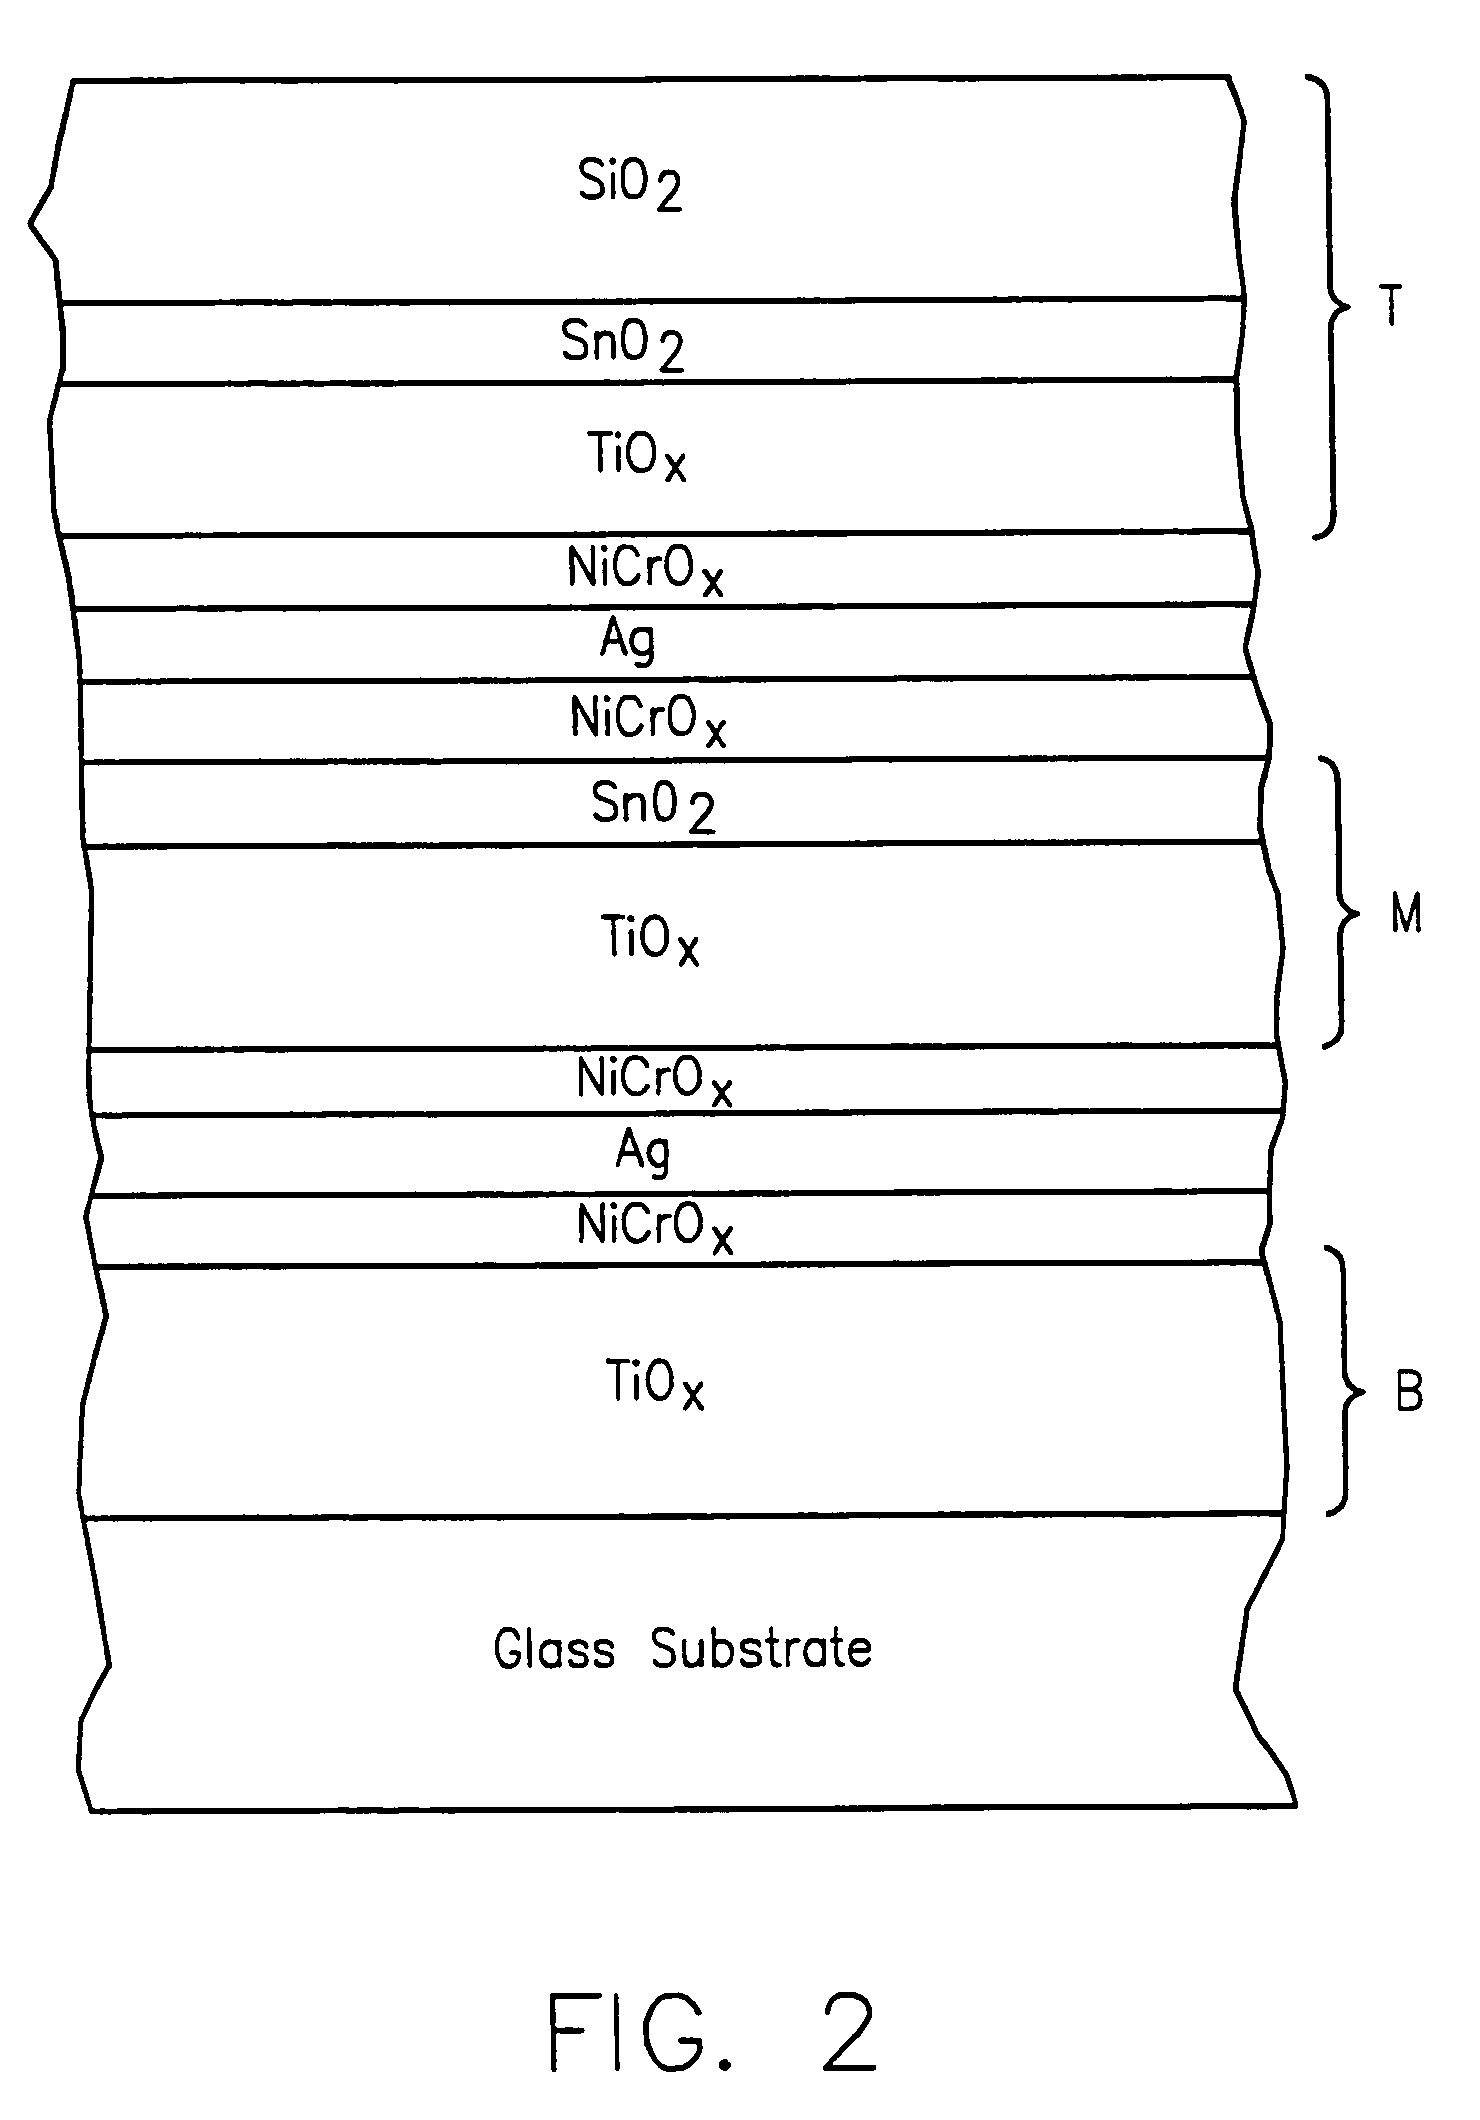 Low-E coating with high visible transmission